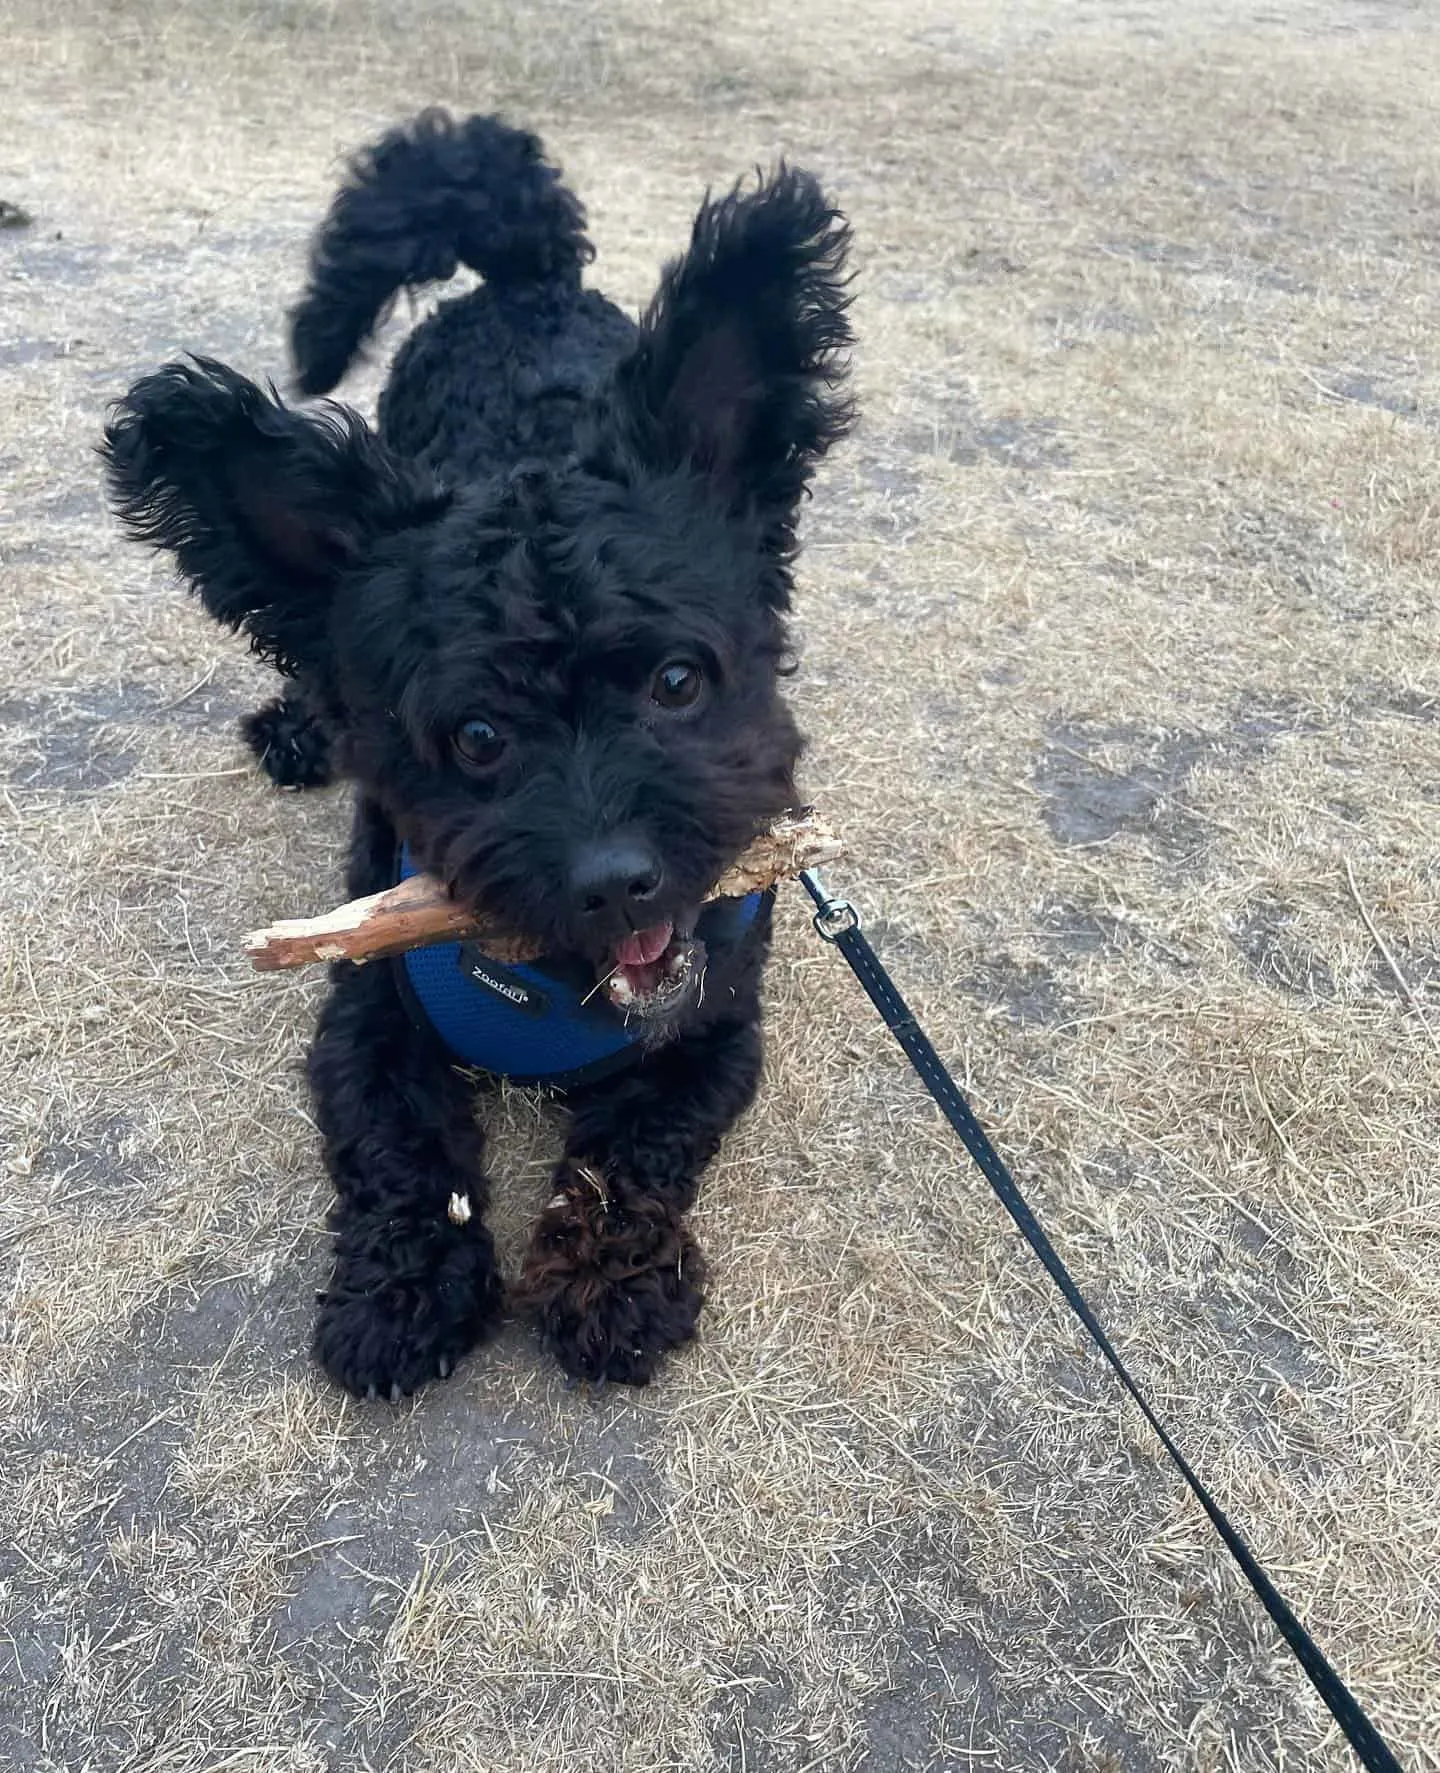 Scoodle holding a stick in mouth